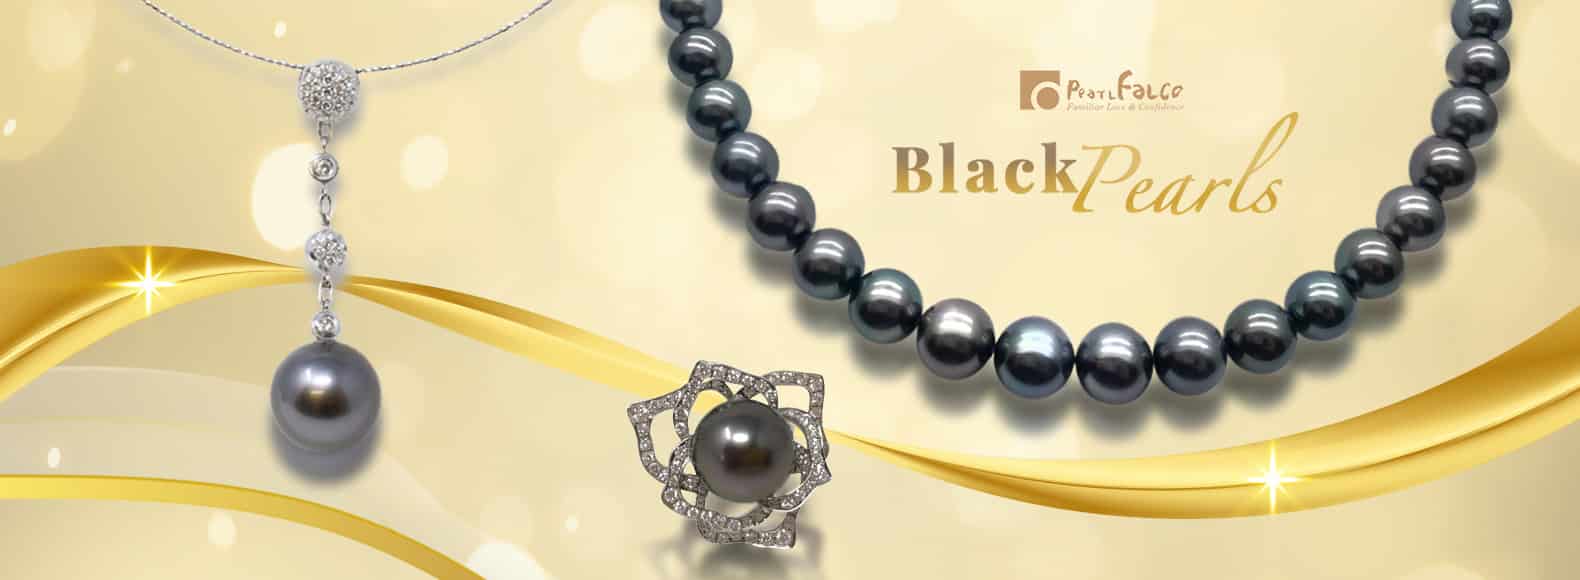 The Black Pearl – A symbol of Power, Wealth and Prosperity